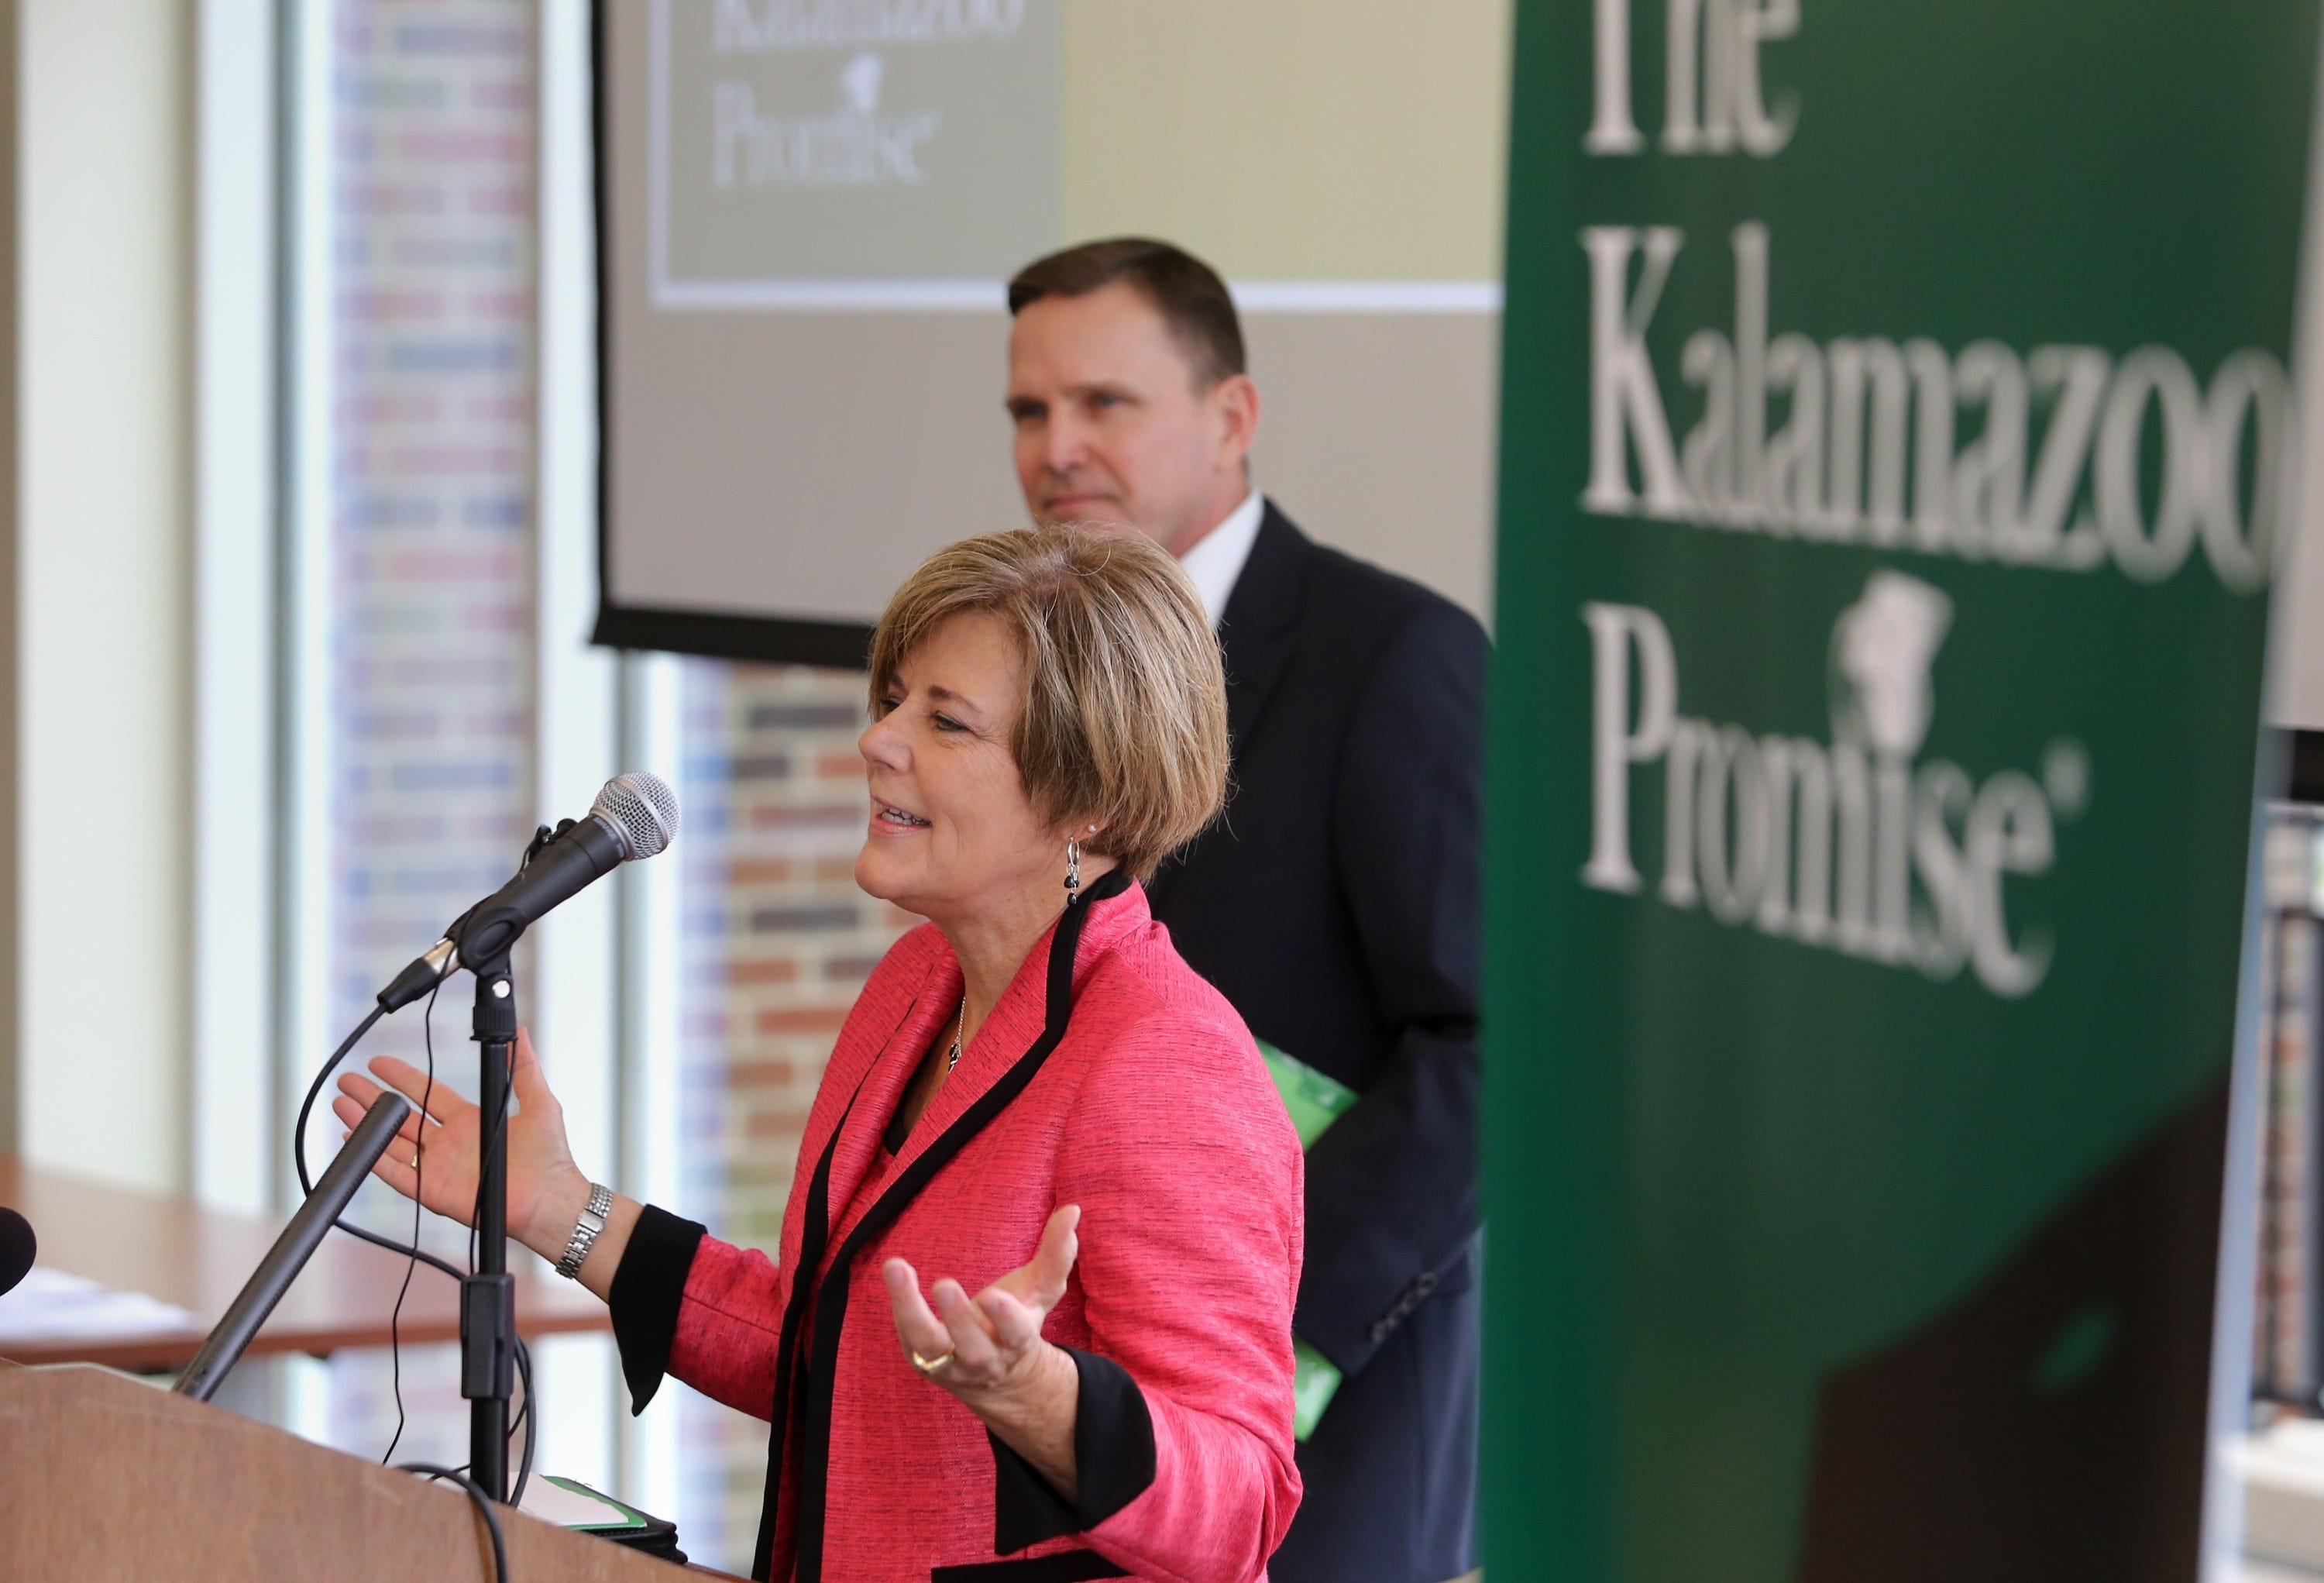 Janice M. Brown, front, board member for the Kalamazoo Promise, speaks as Robert Bartlett, president of the Michigan Colleges Alliance, listens during a news conference in 2014 in Kalamazoo.